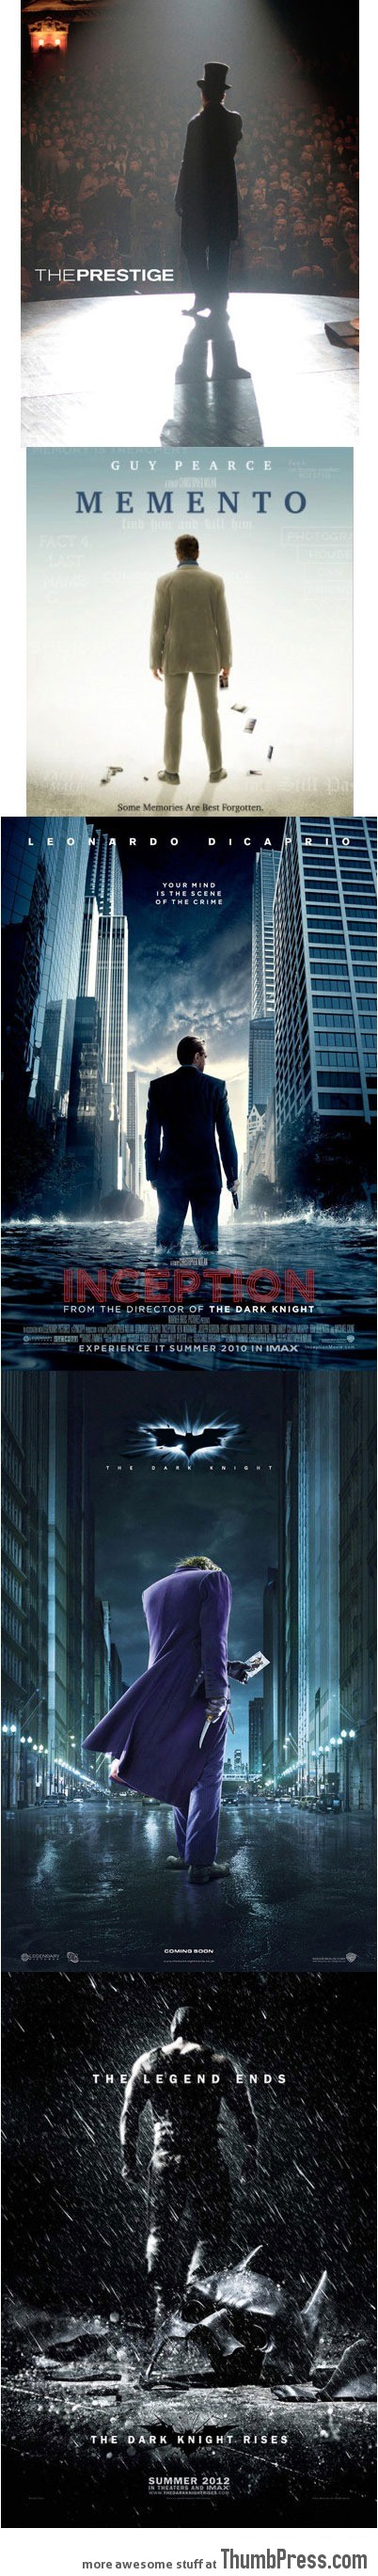 When Christopher Nolan directs, they know what kind of poster to make…